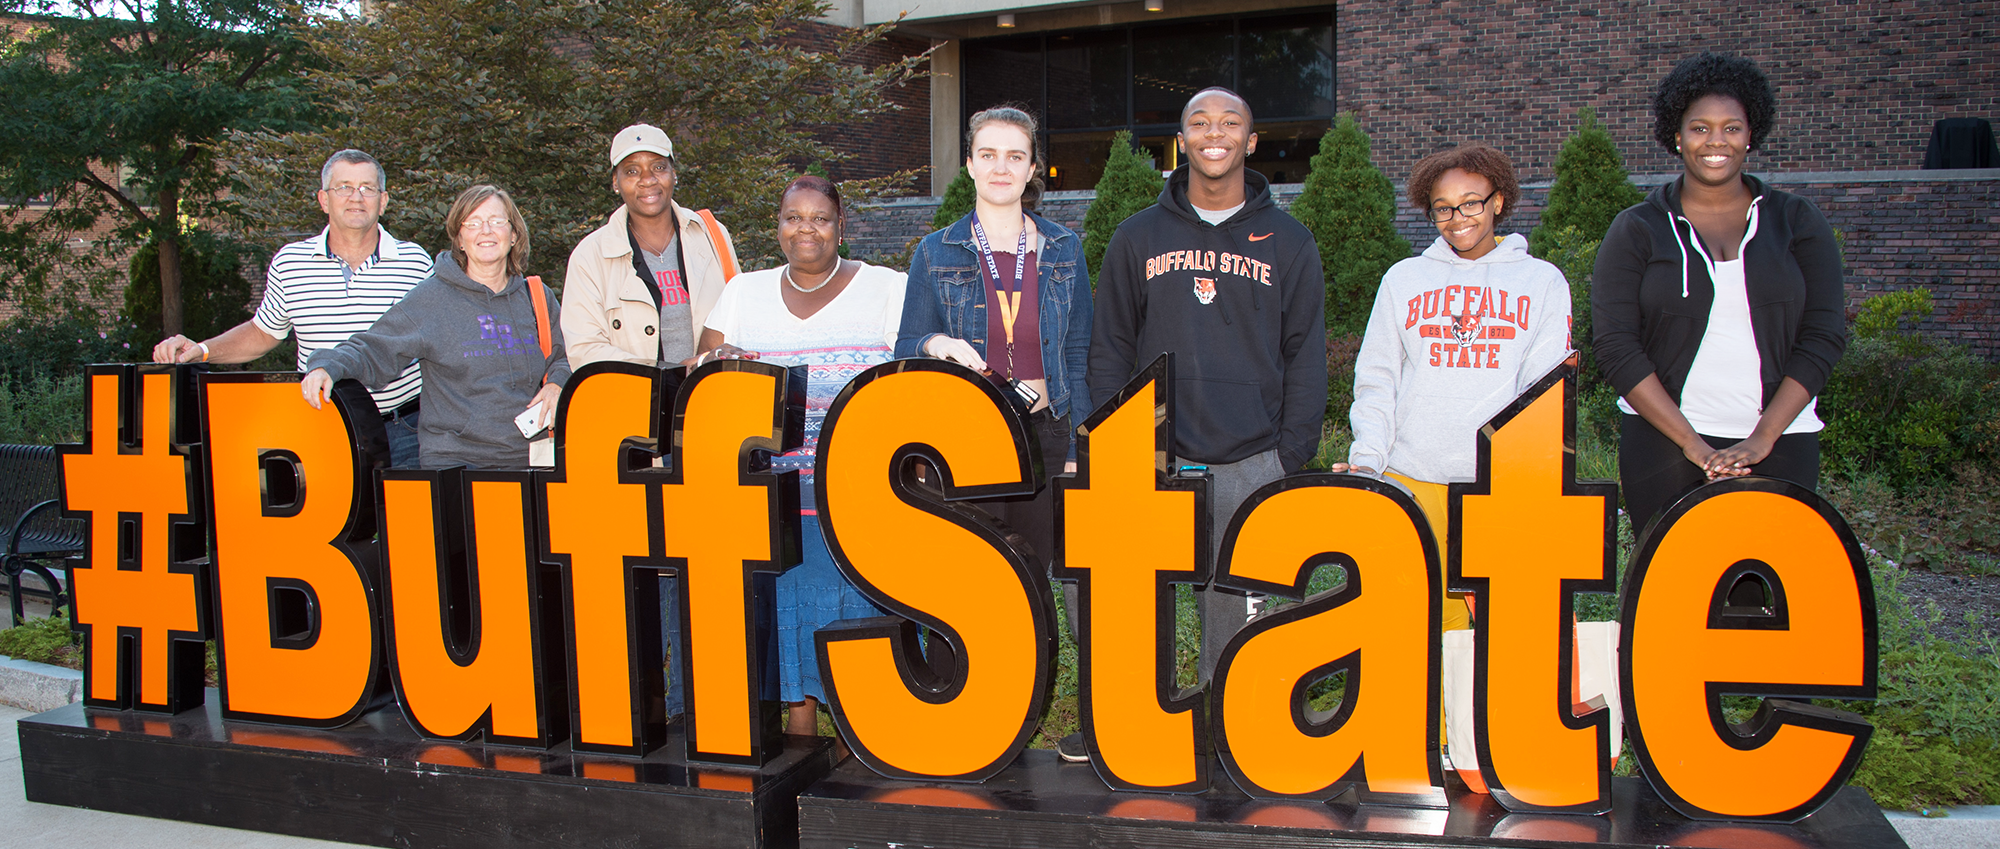 Save the date for Homecoming and Family Week at Buffalo State, October 20-27, 2019.